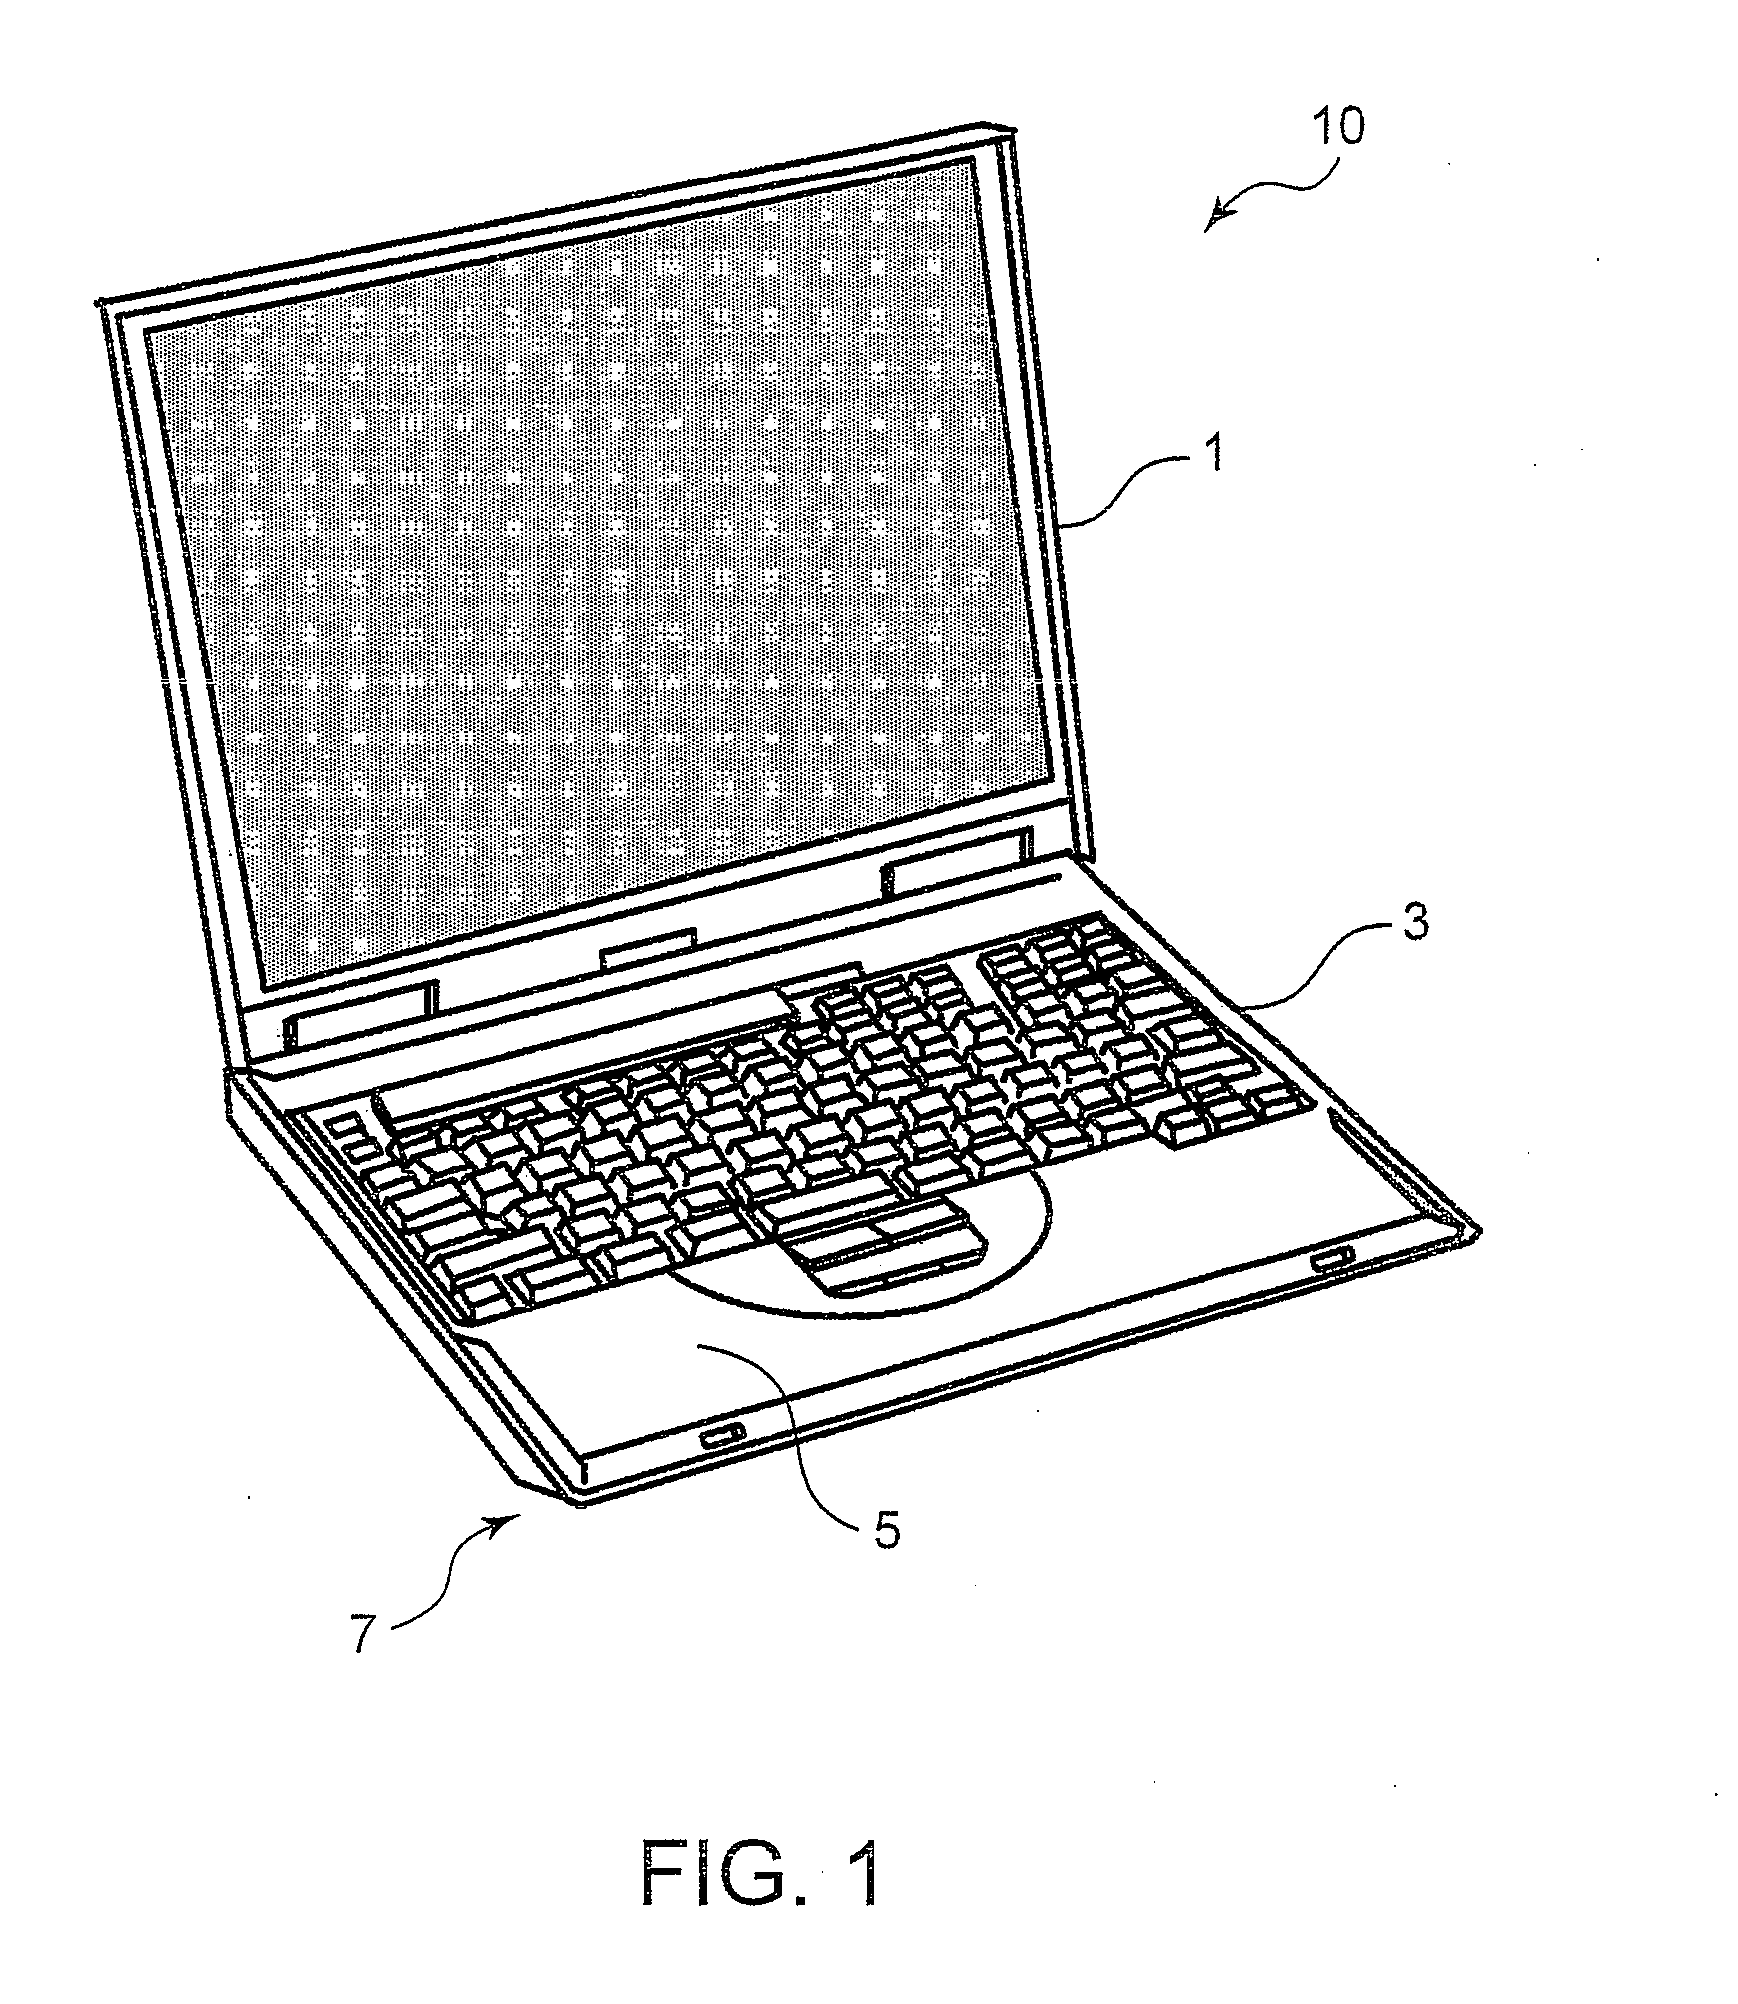 Heat Dissipation System for Computers